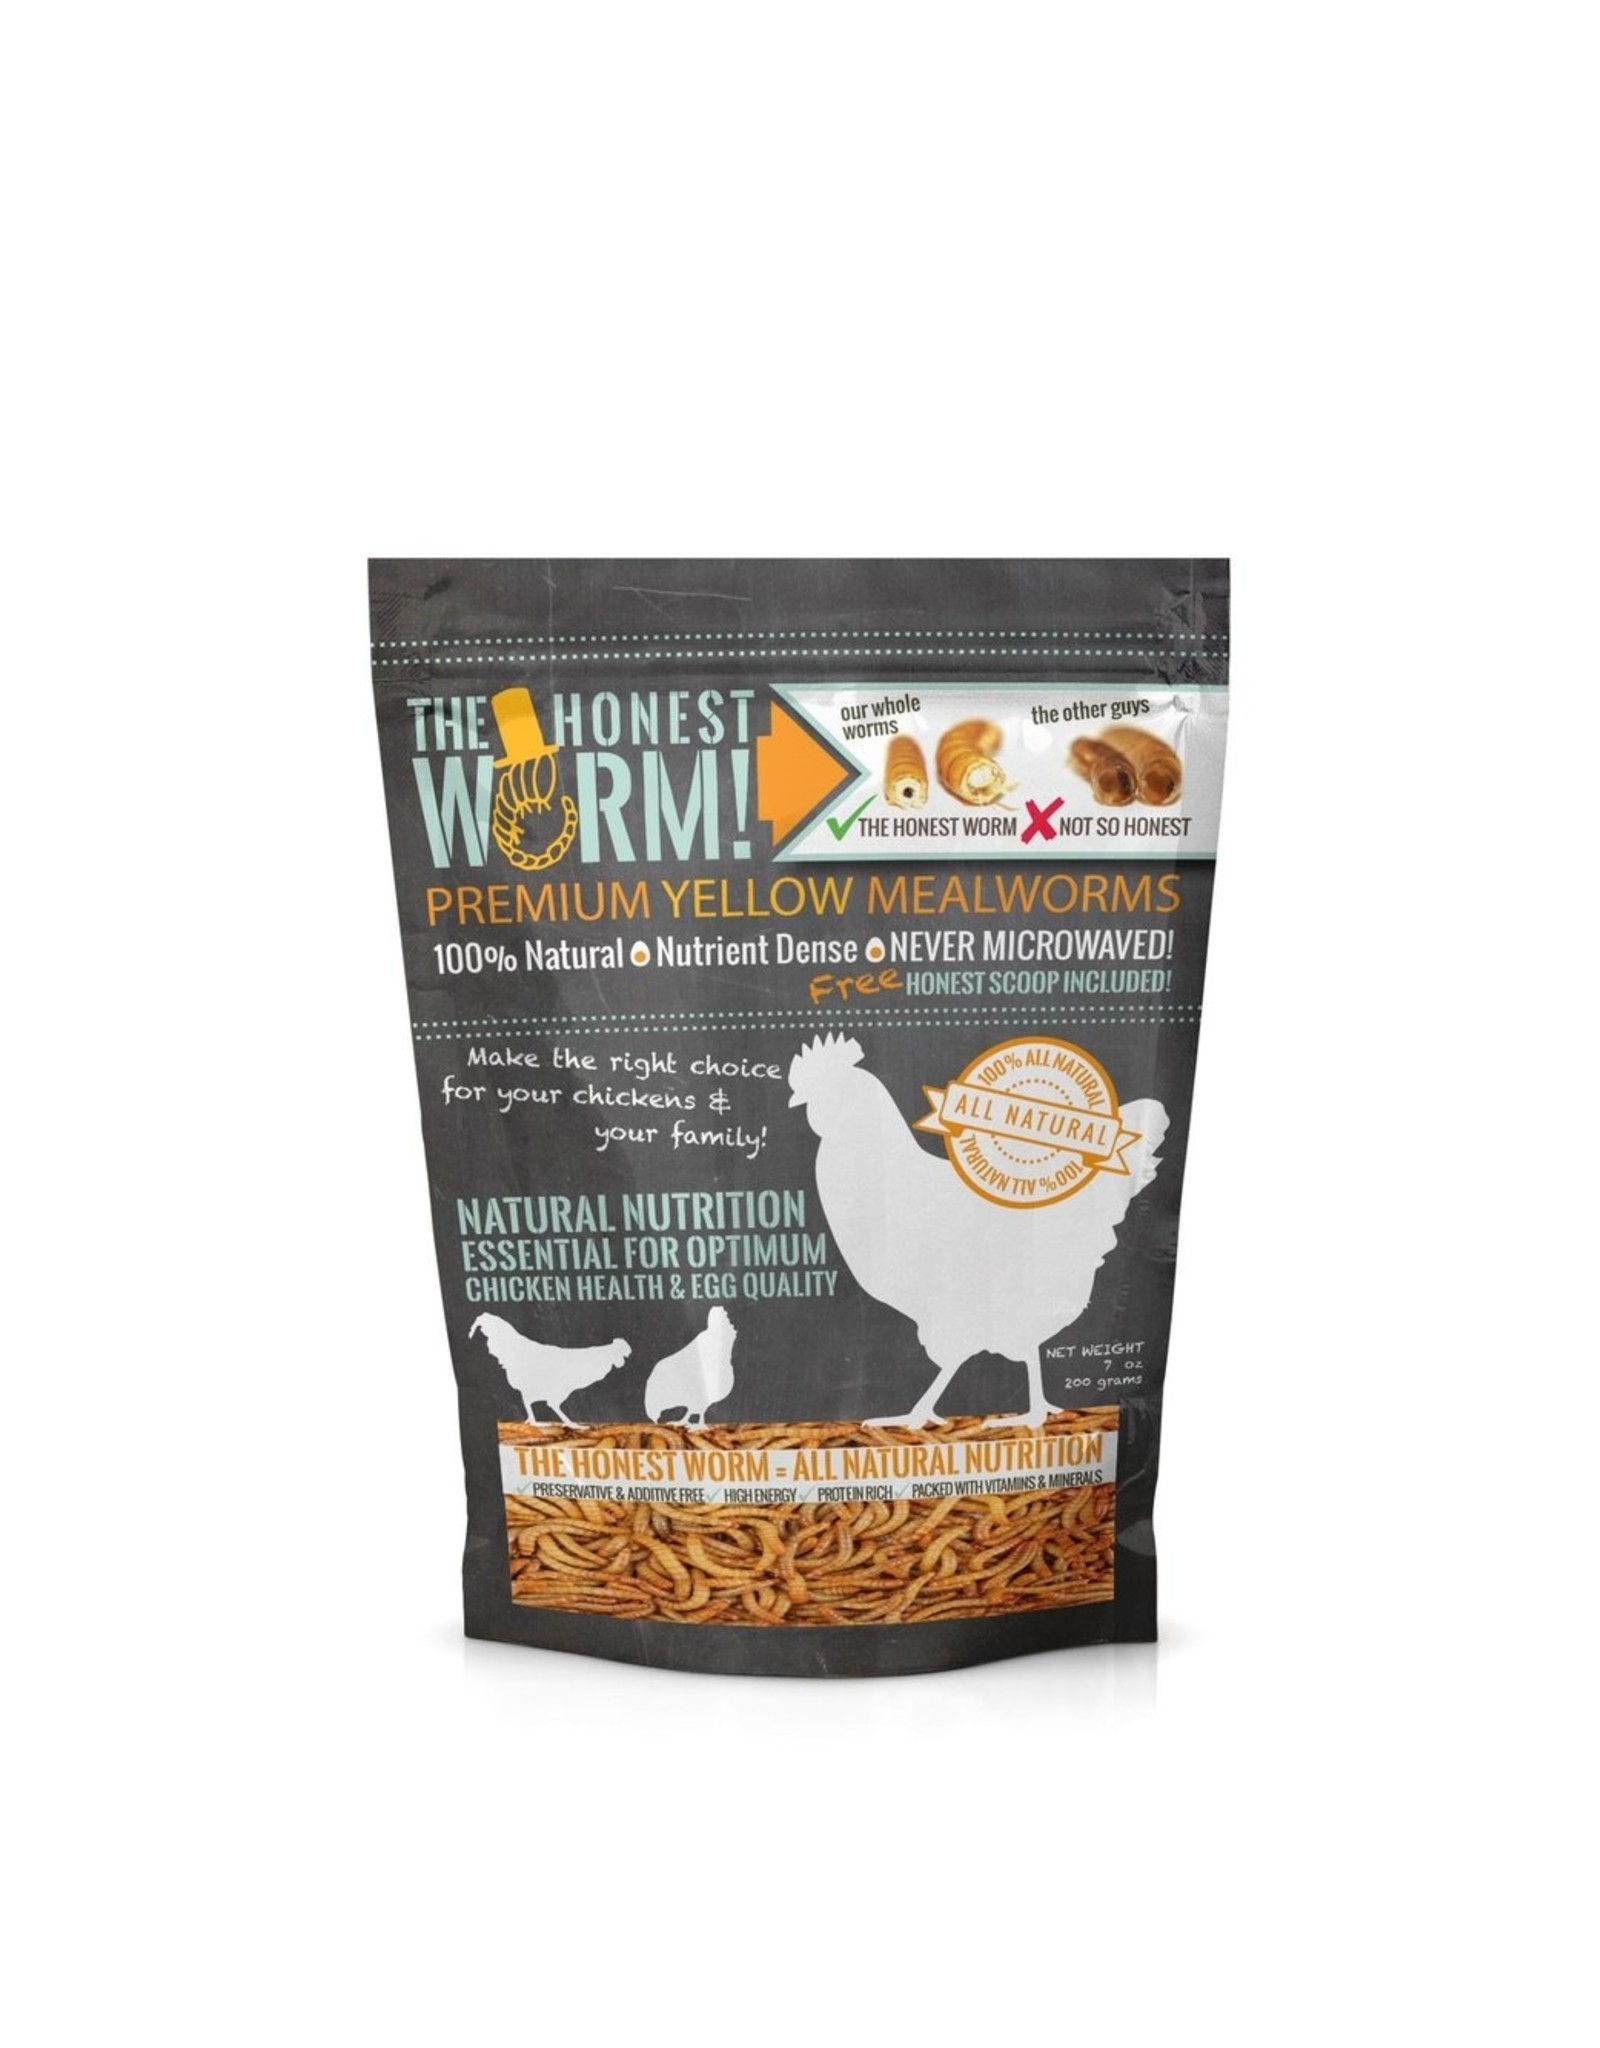 DAVE & MATTS CHICKEN STUFF THE HONEST WORM! FREEZE DRIED MEALWORMS 70Z